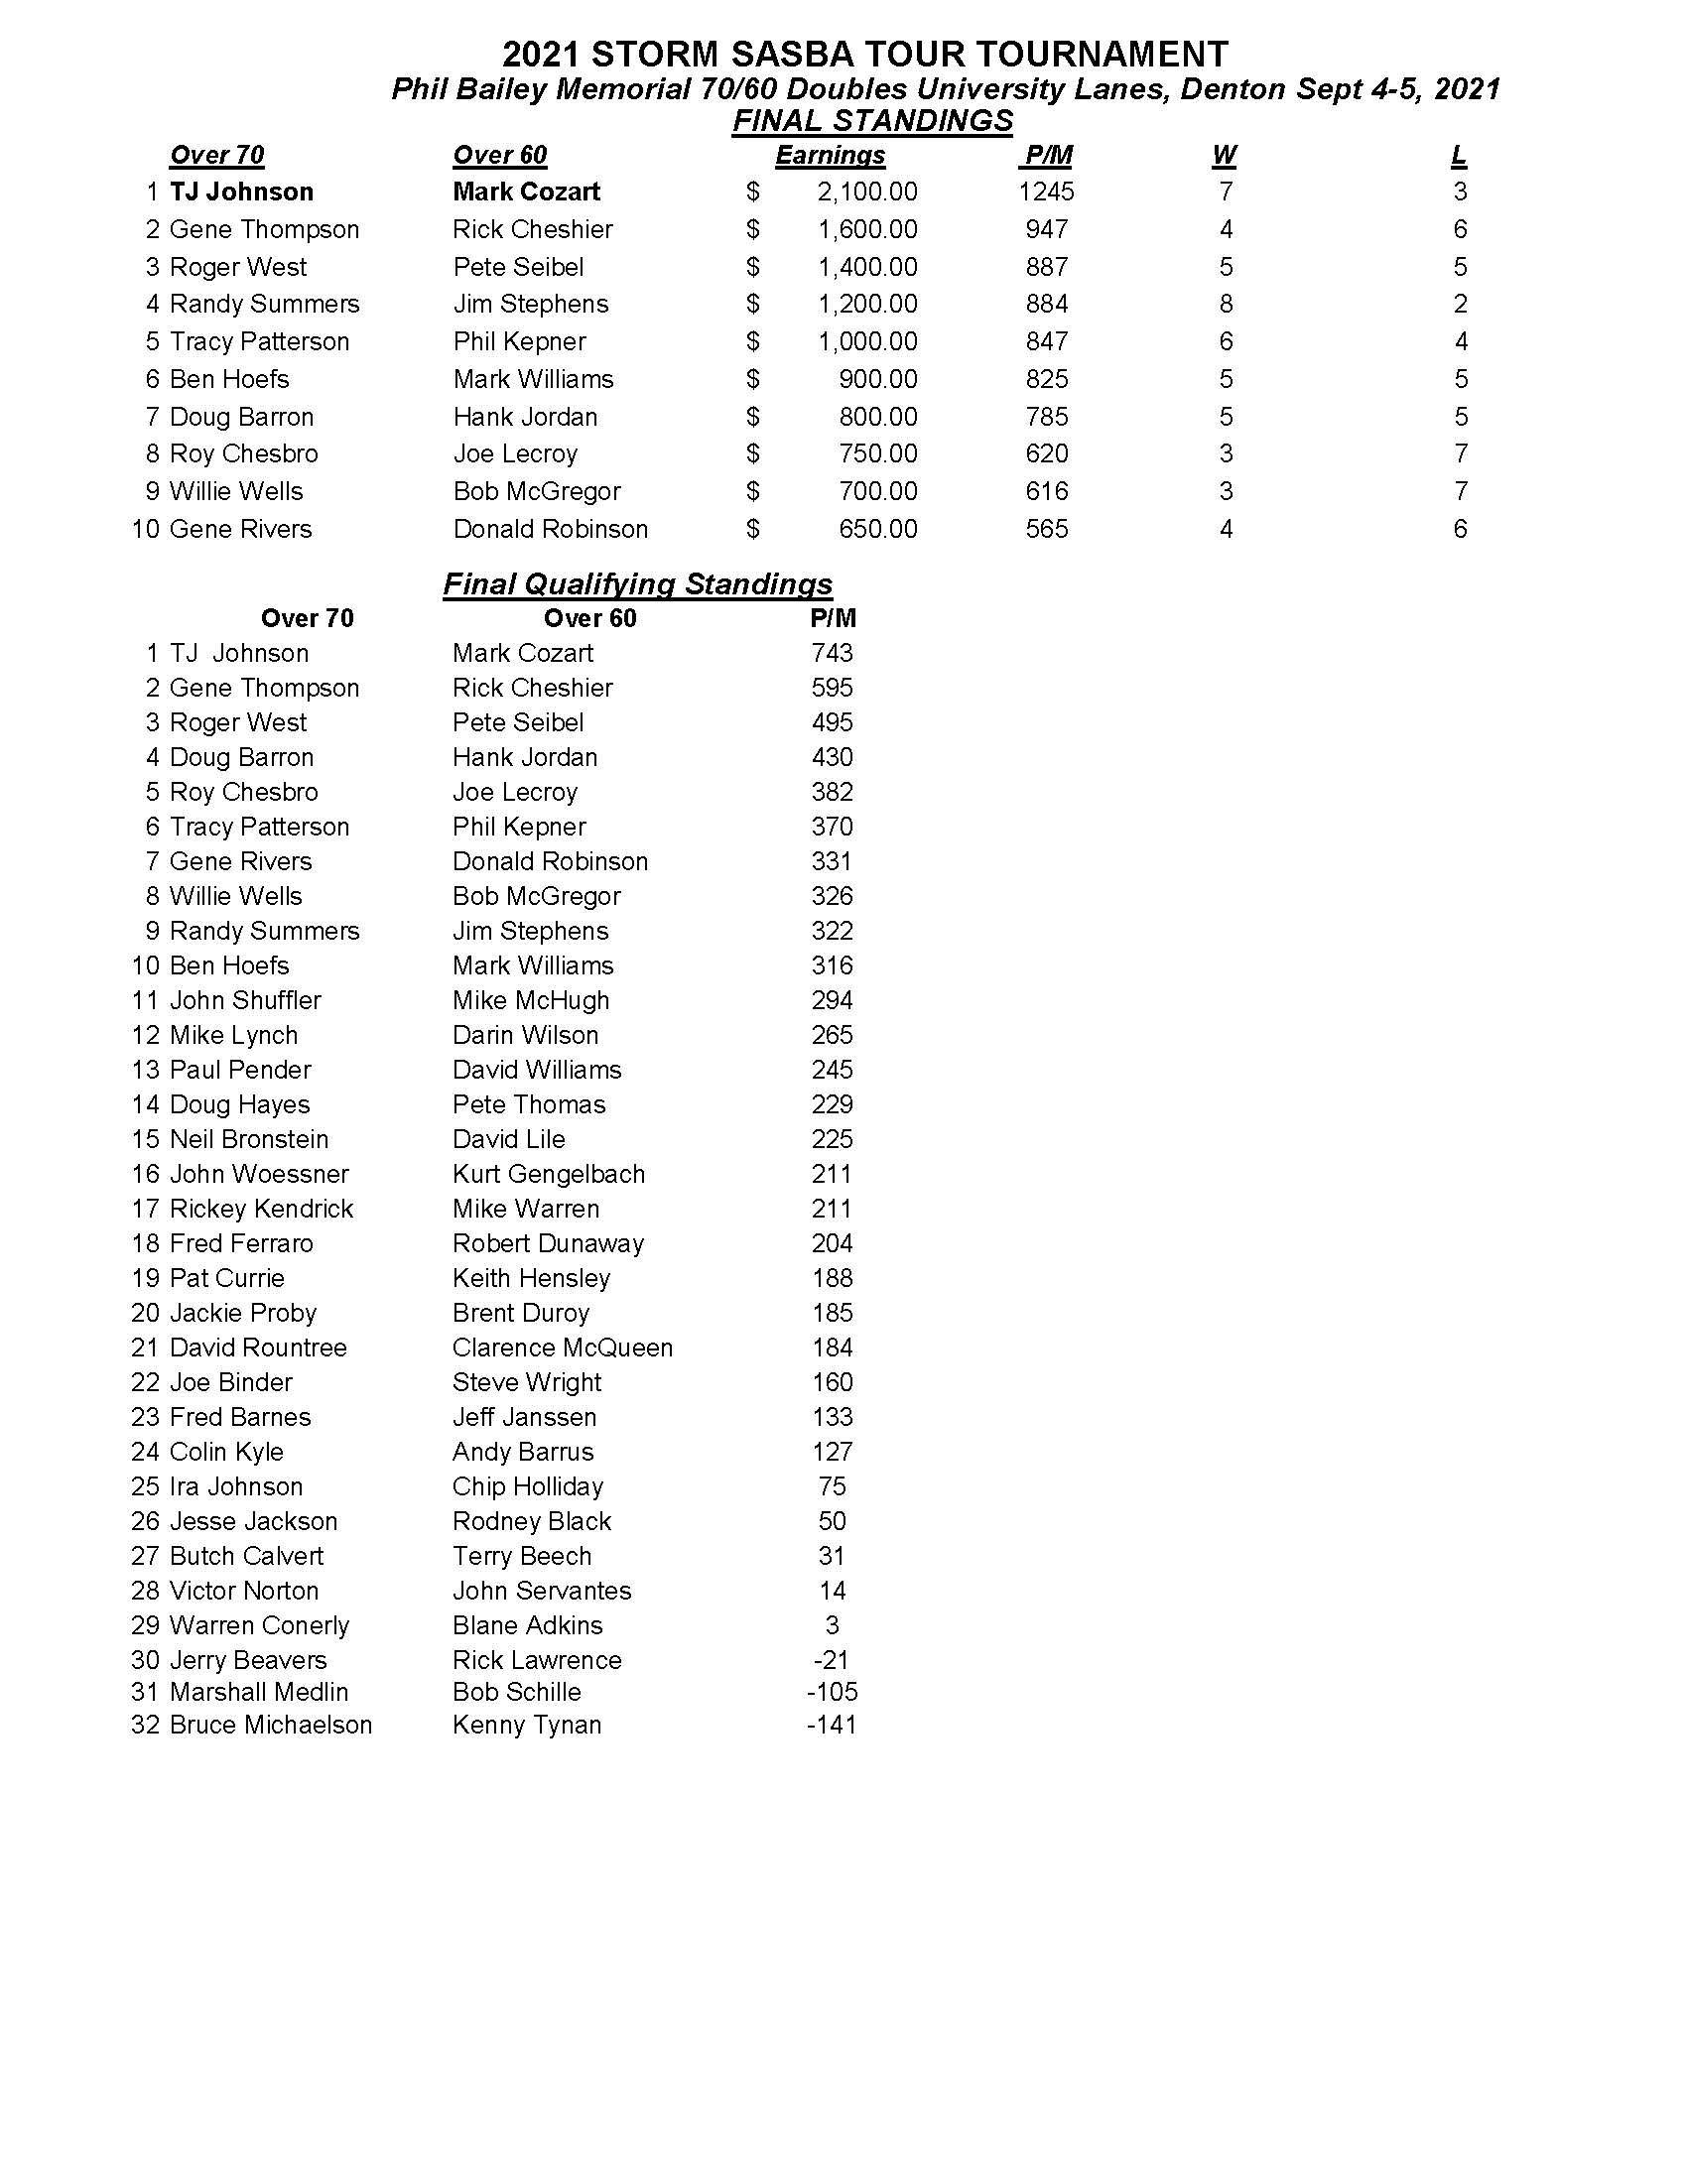 09052021results_Page_1